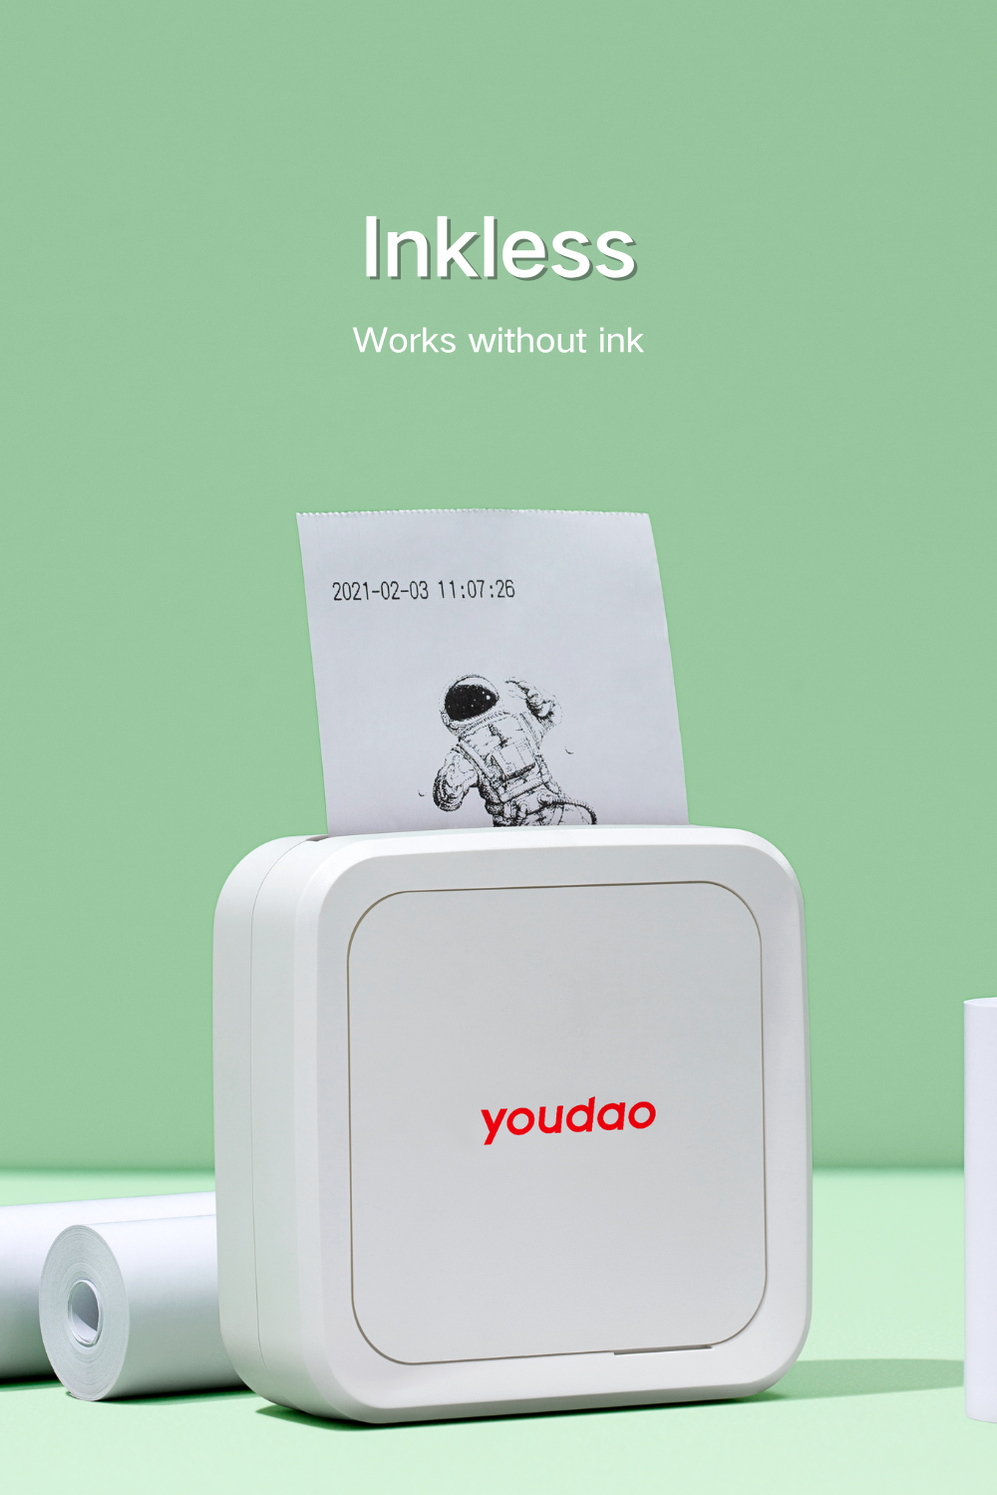 Youdao pocket printer - Thermal printer, print from your phone